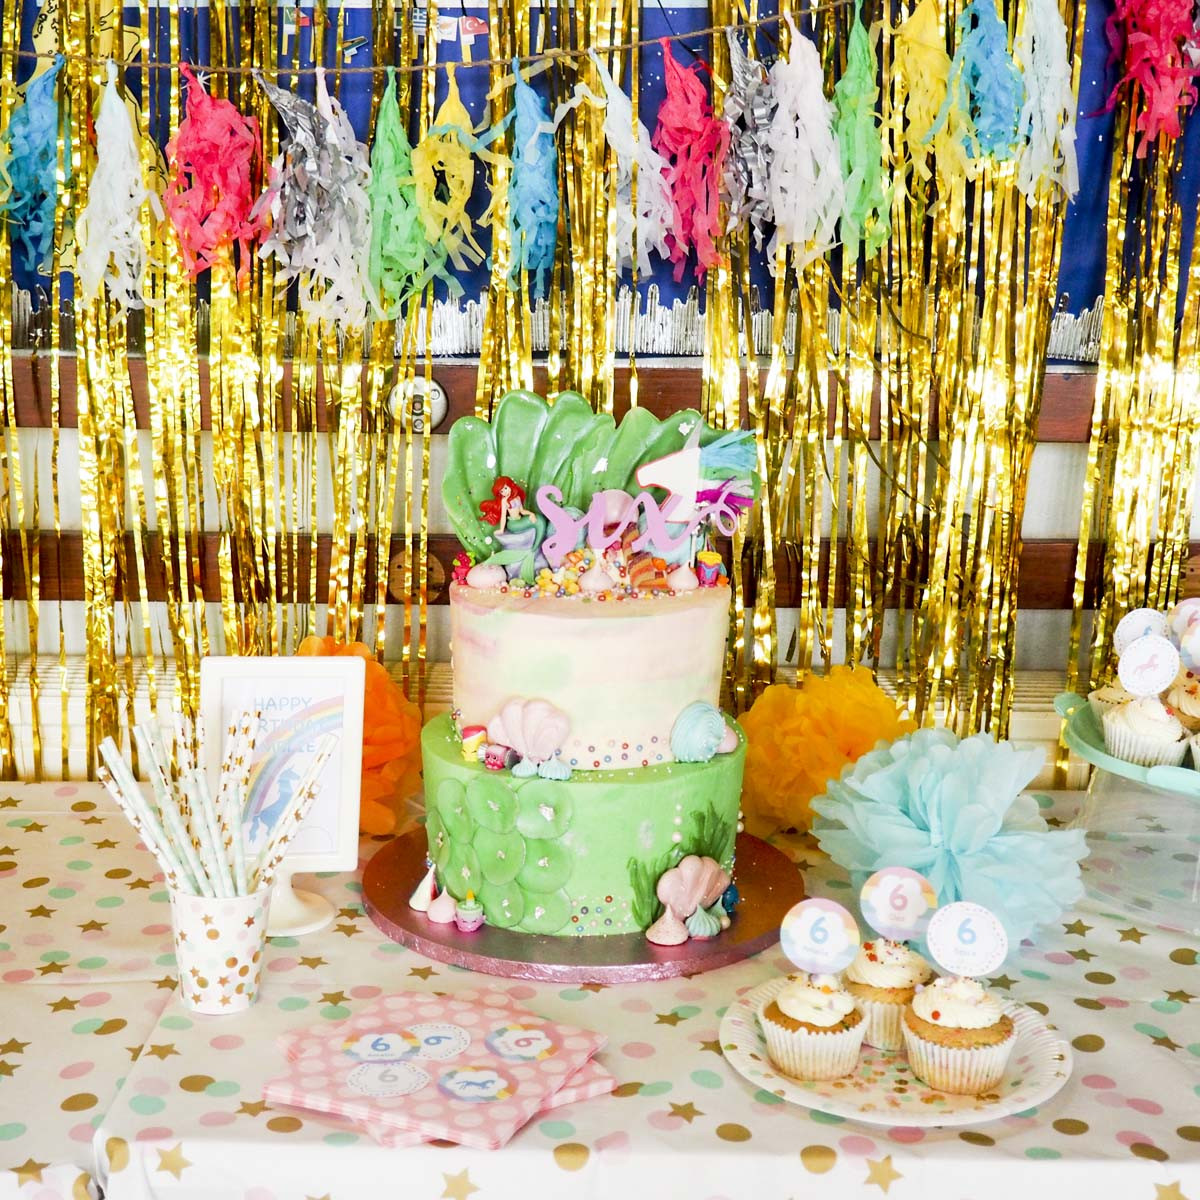 Mermaid Party Ideas 6 Year Old
 Mermaids Unicorns and Rainbows The 6 Year Old s Birthday